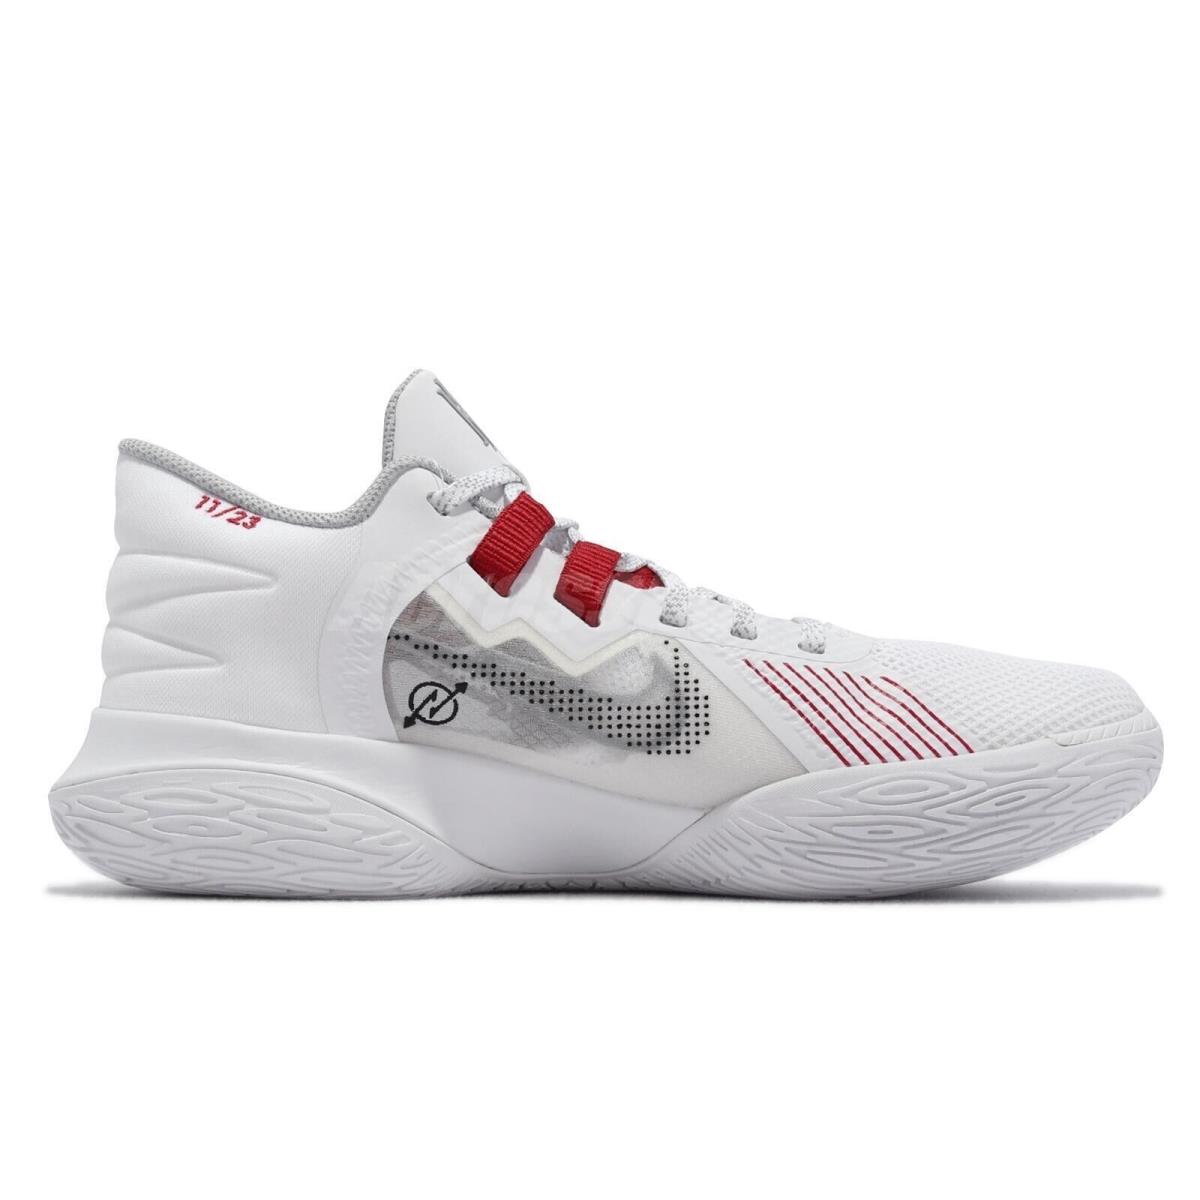 Nike shoes Kyrie - White/ Red , white/ red Manufacturer 0